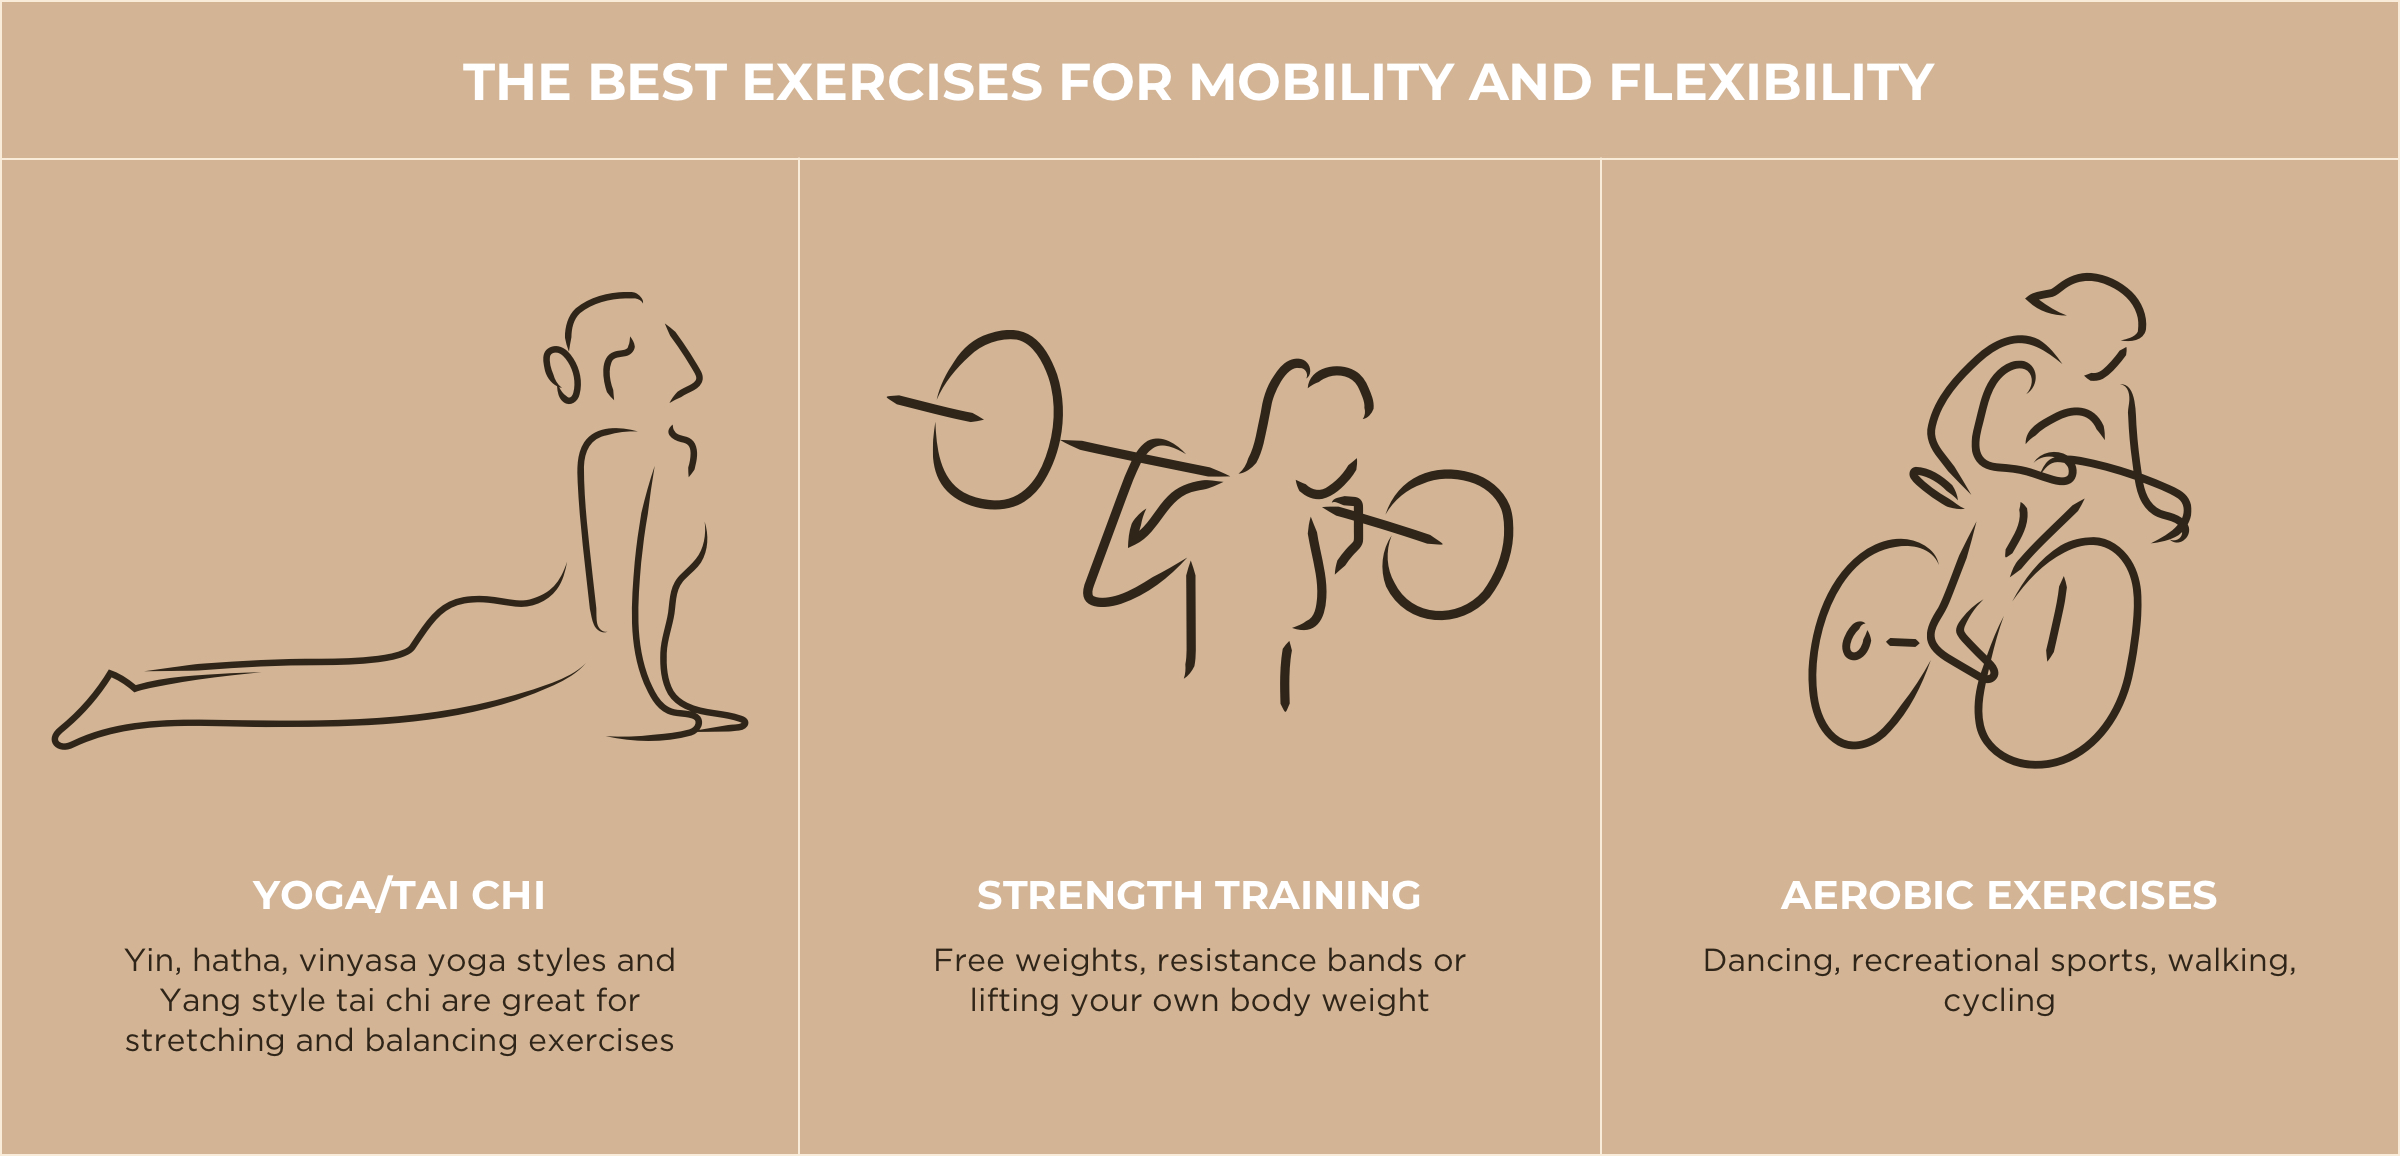 The Best Exercises for Mobility and Flexibility